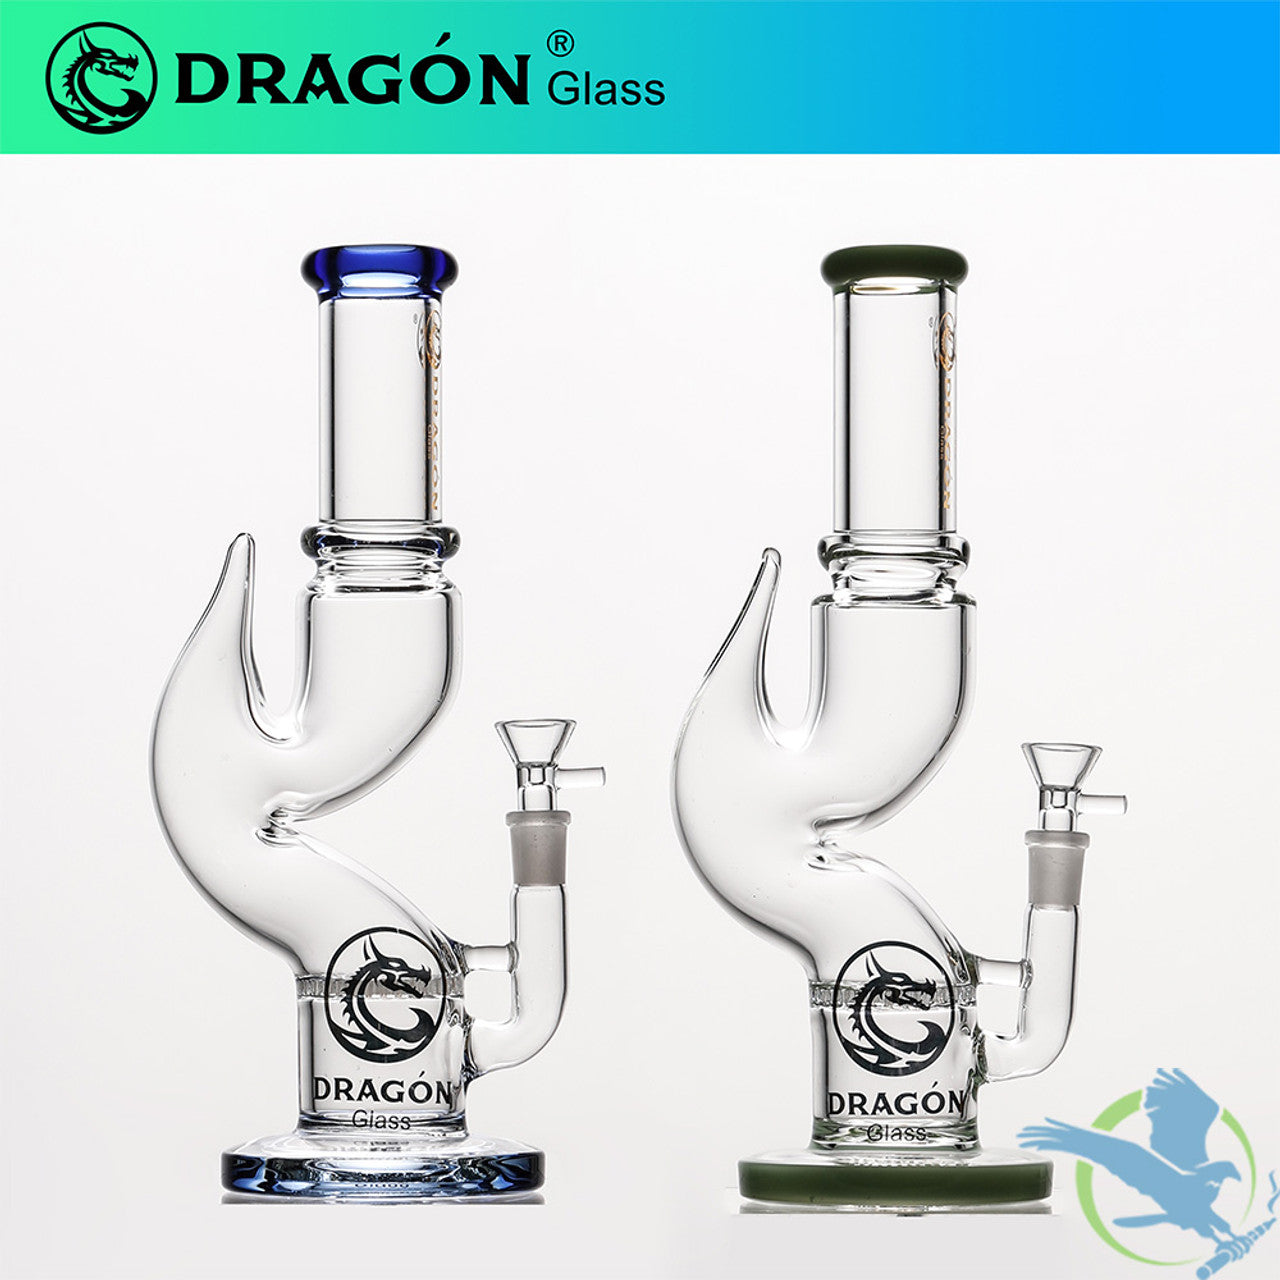 Dragon Glass Honeycomb Perc Horned Chamber Straight Neck Water Pipe With Thick Base - 730 Grams - 12 Inches - Assorted Colors